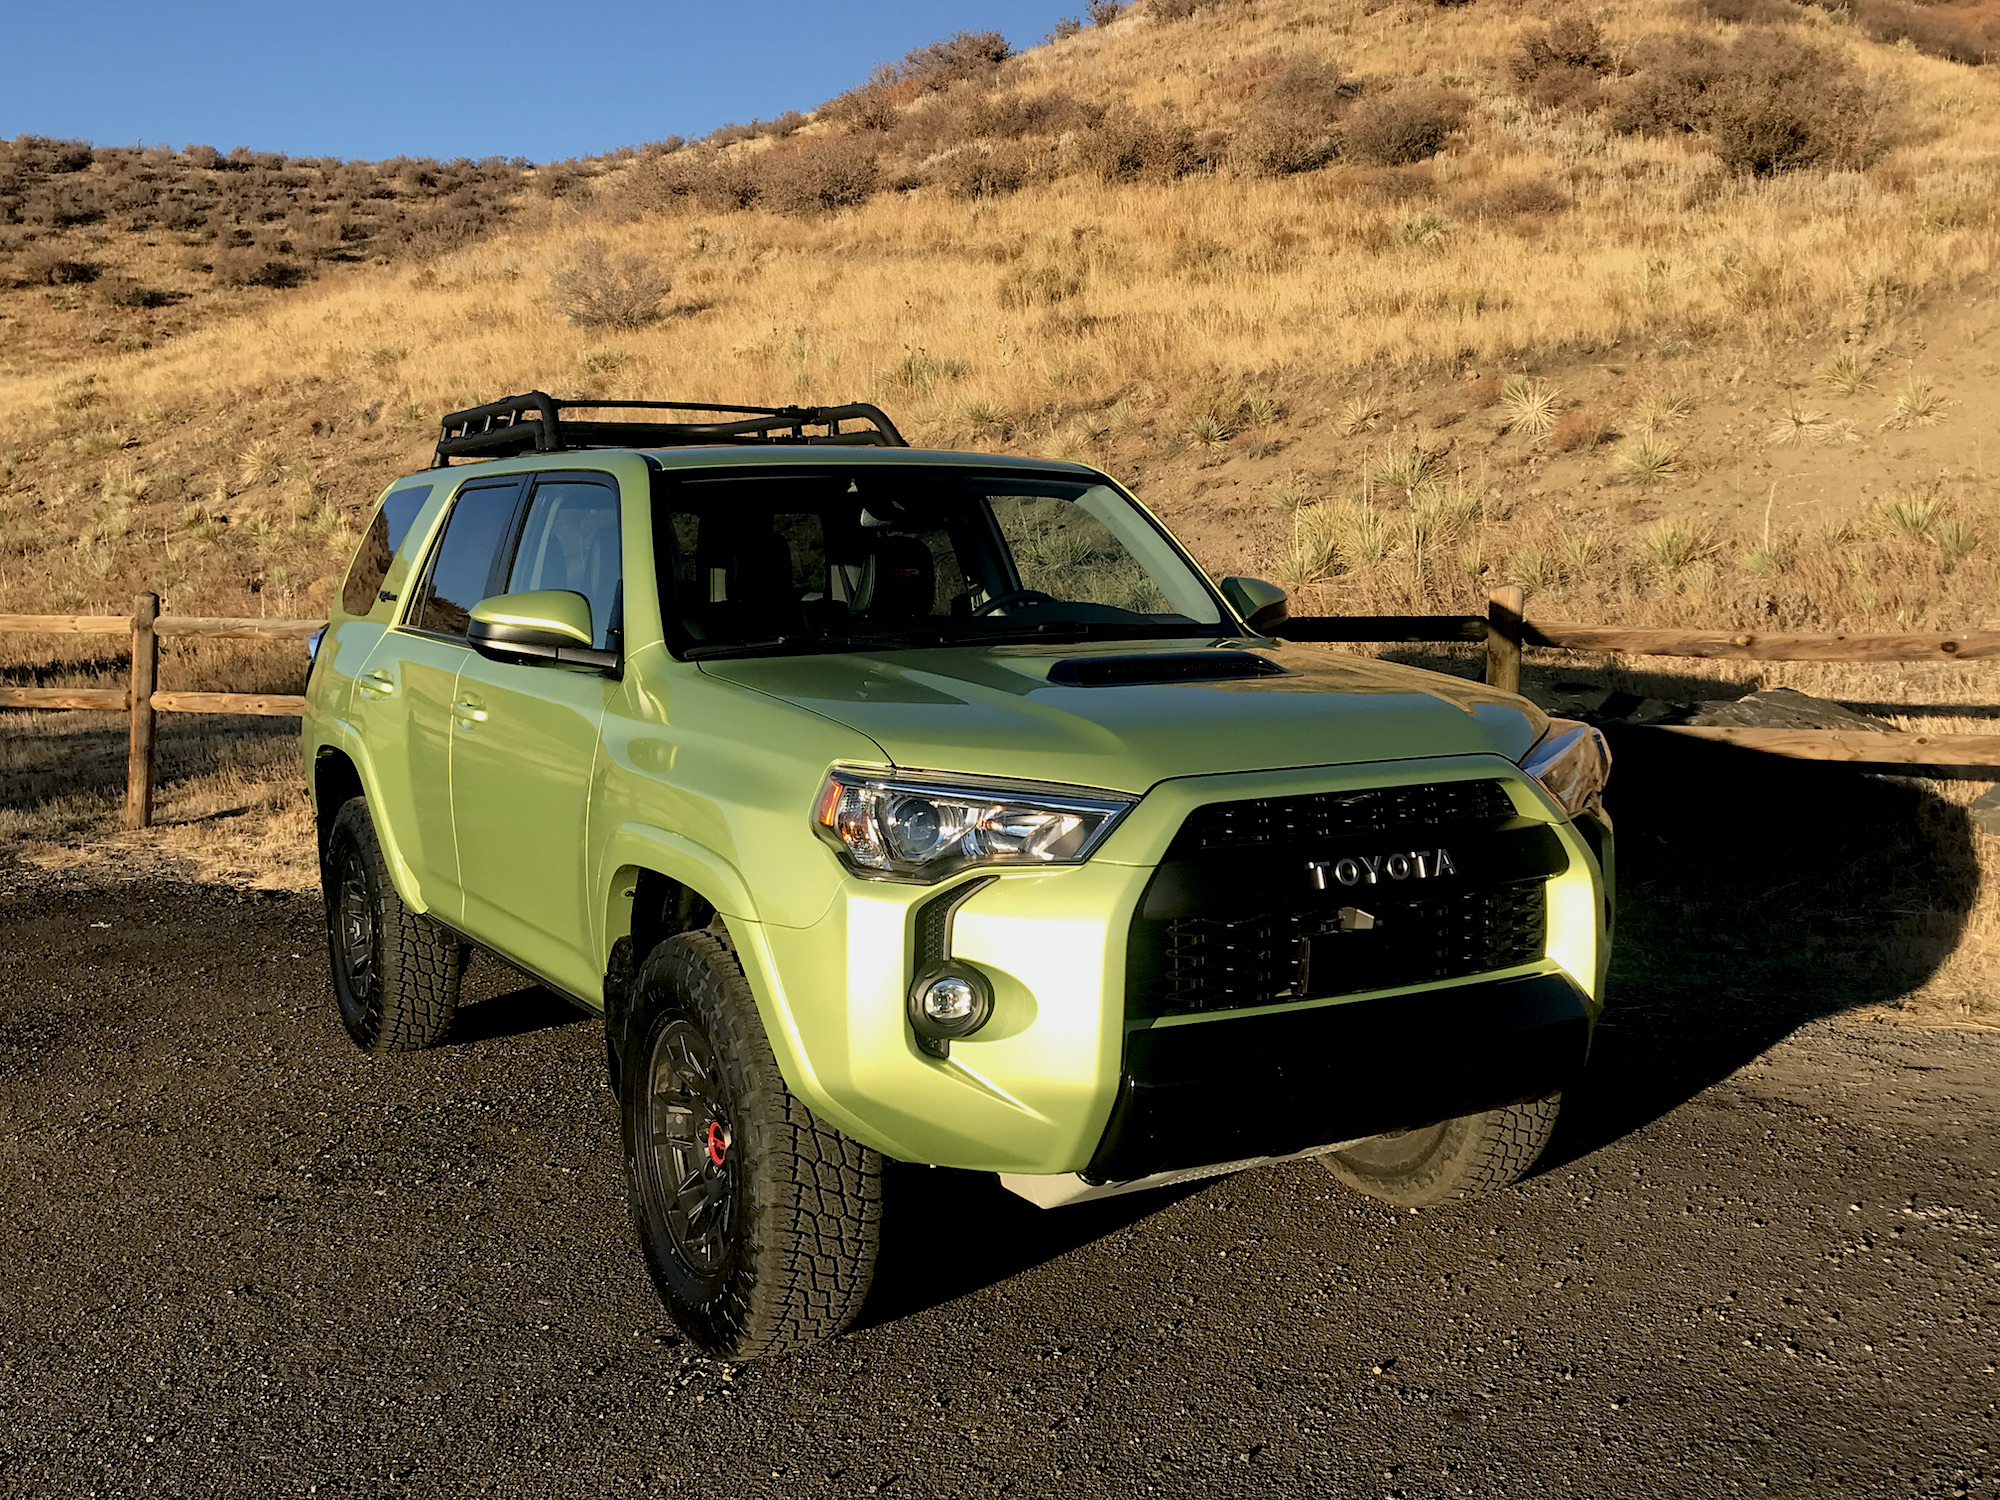 The Toyota USA Newsroom reports that the Toyota 4Runner now has a new TRD Sport model and new standard safety features.